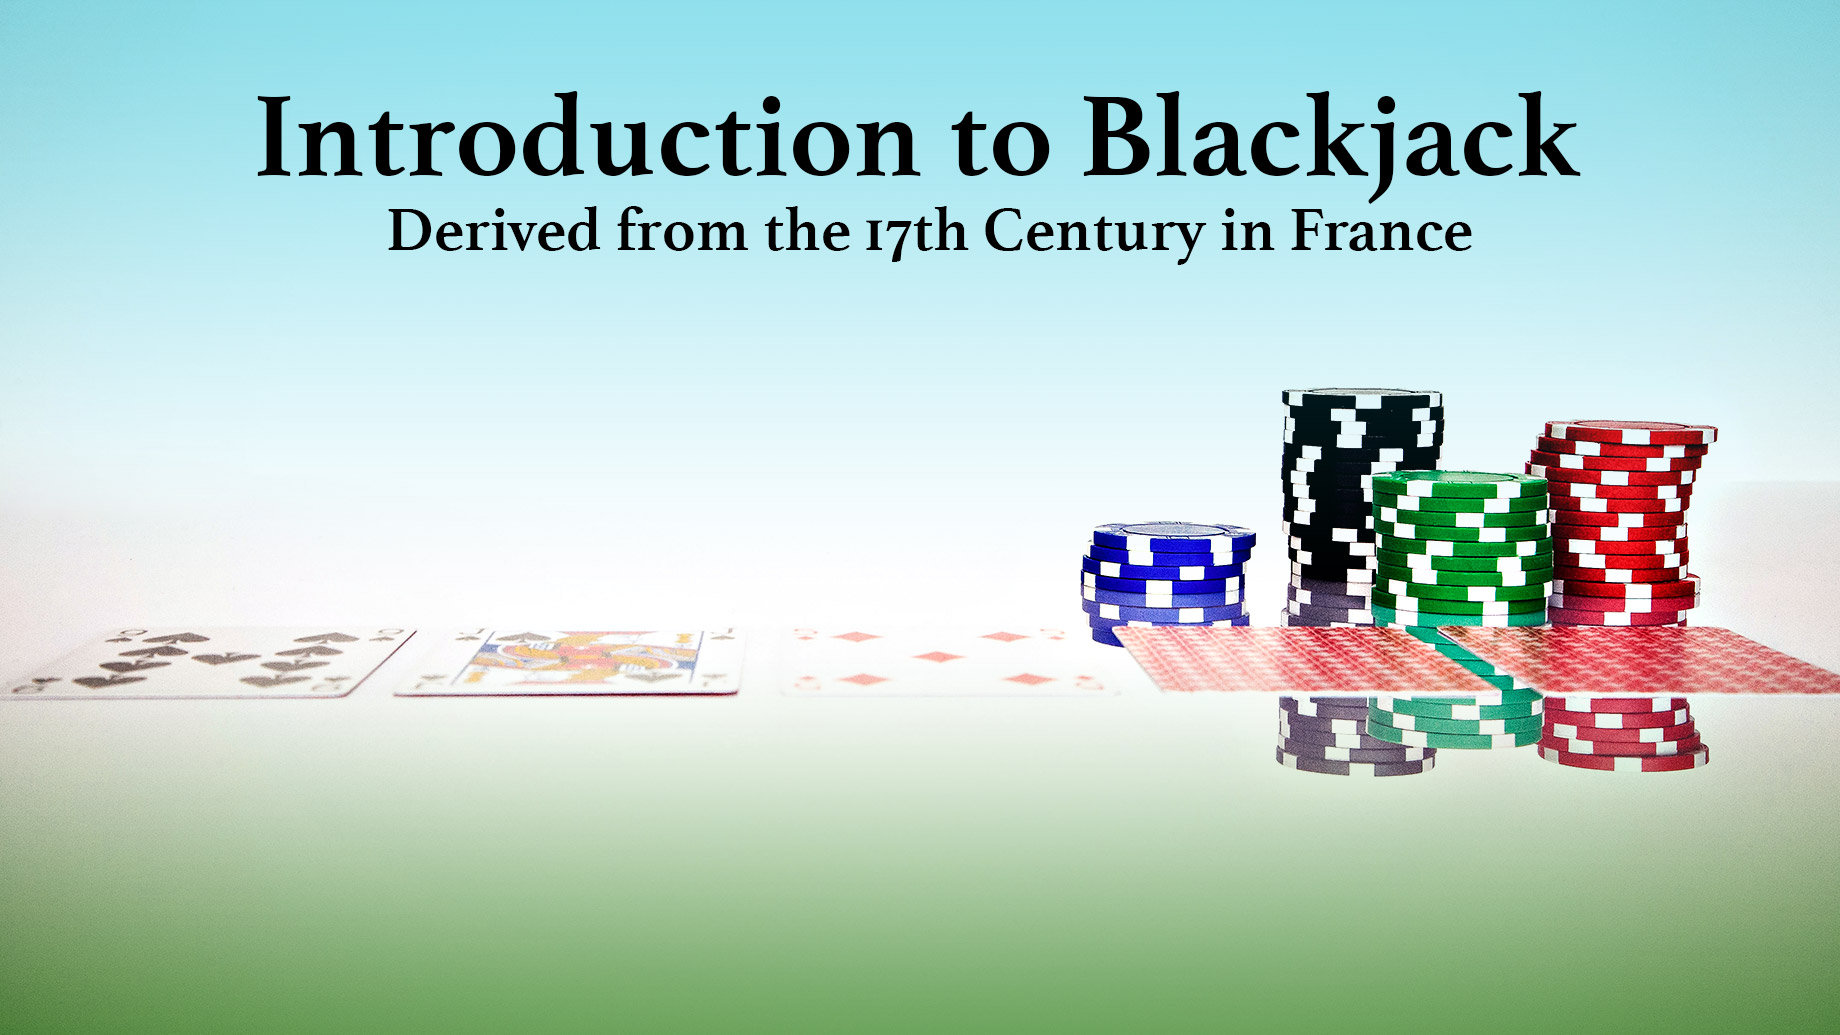 Introduction to Blackjack - Derived from the 17th Century in France